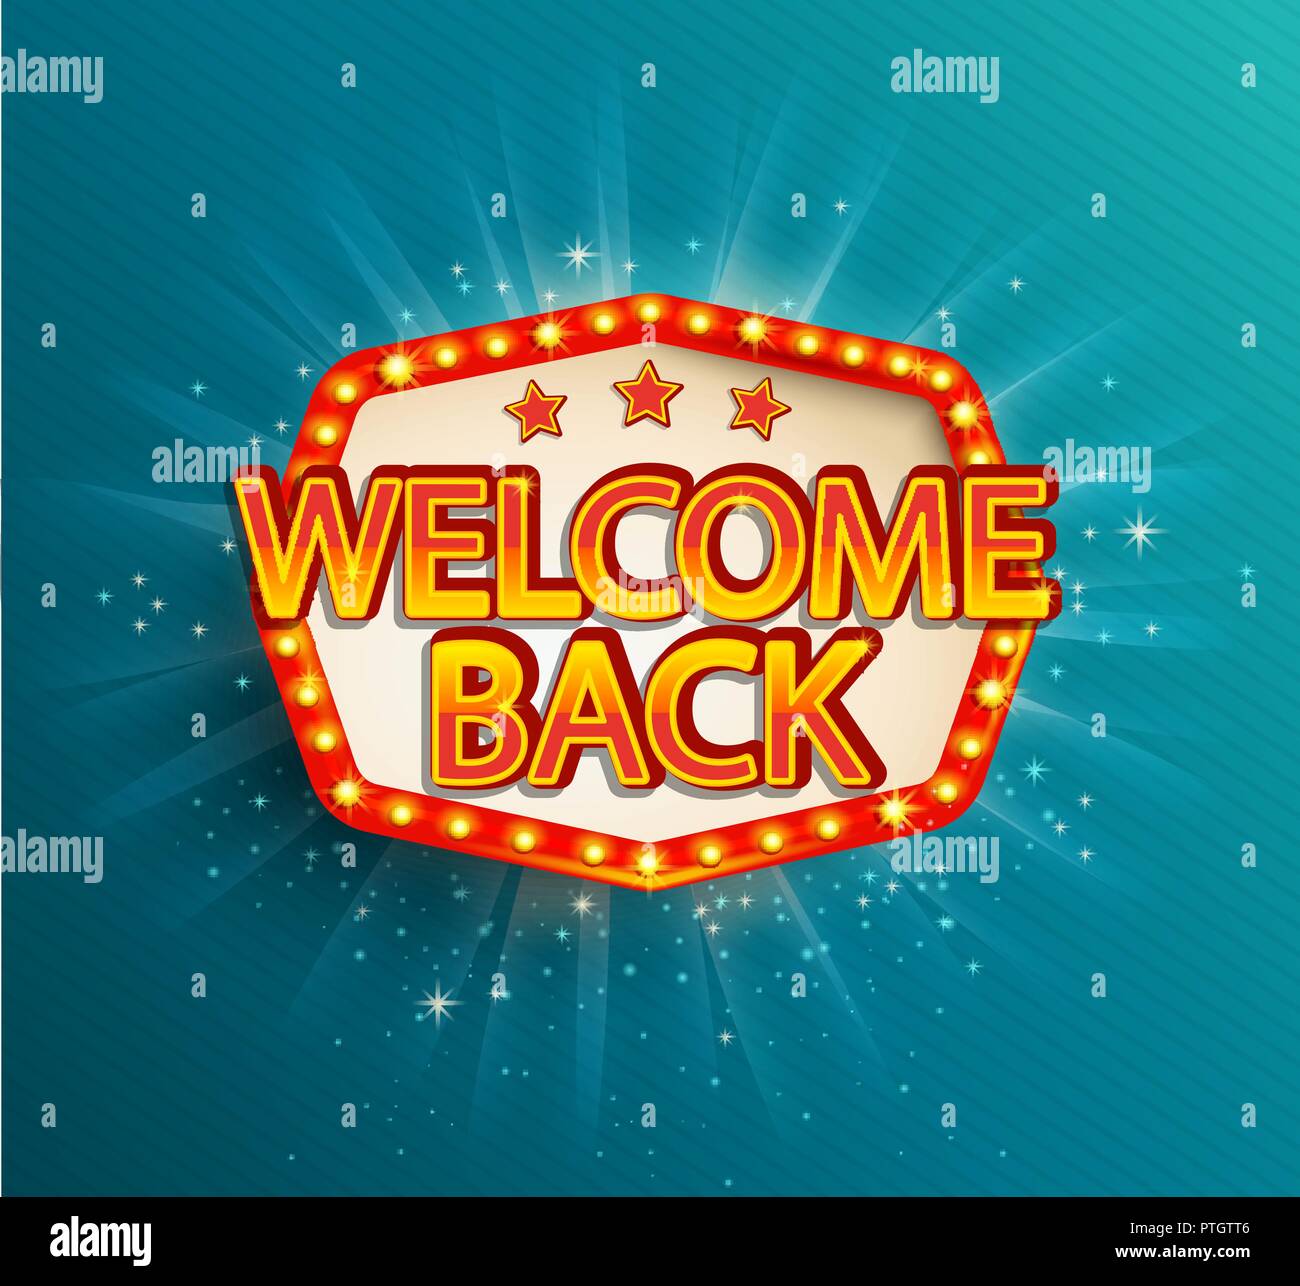 The welcome back retro banner with glowing lamps. Vector illustration with shining lights frame in vintage style. Greetings to casino, gambling, cinema, city for travelers. Stock Vector